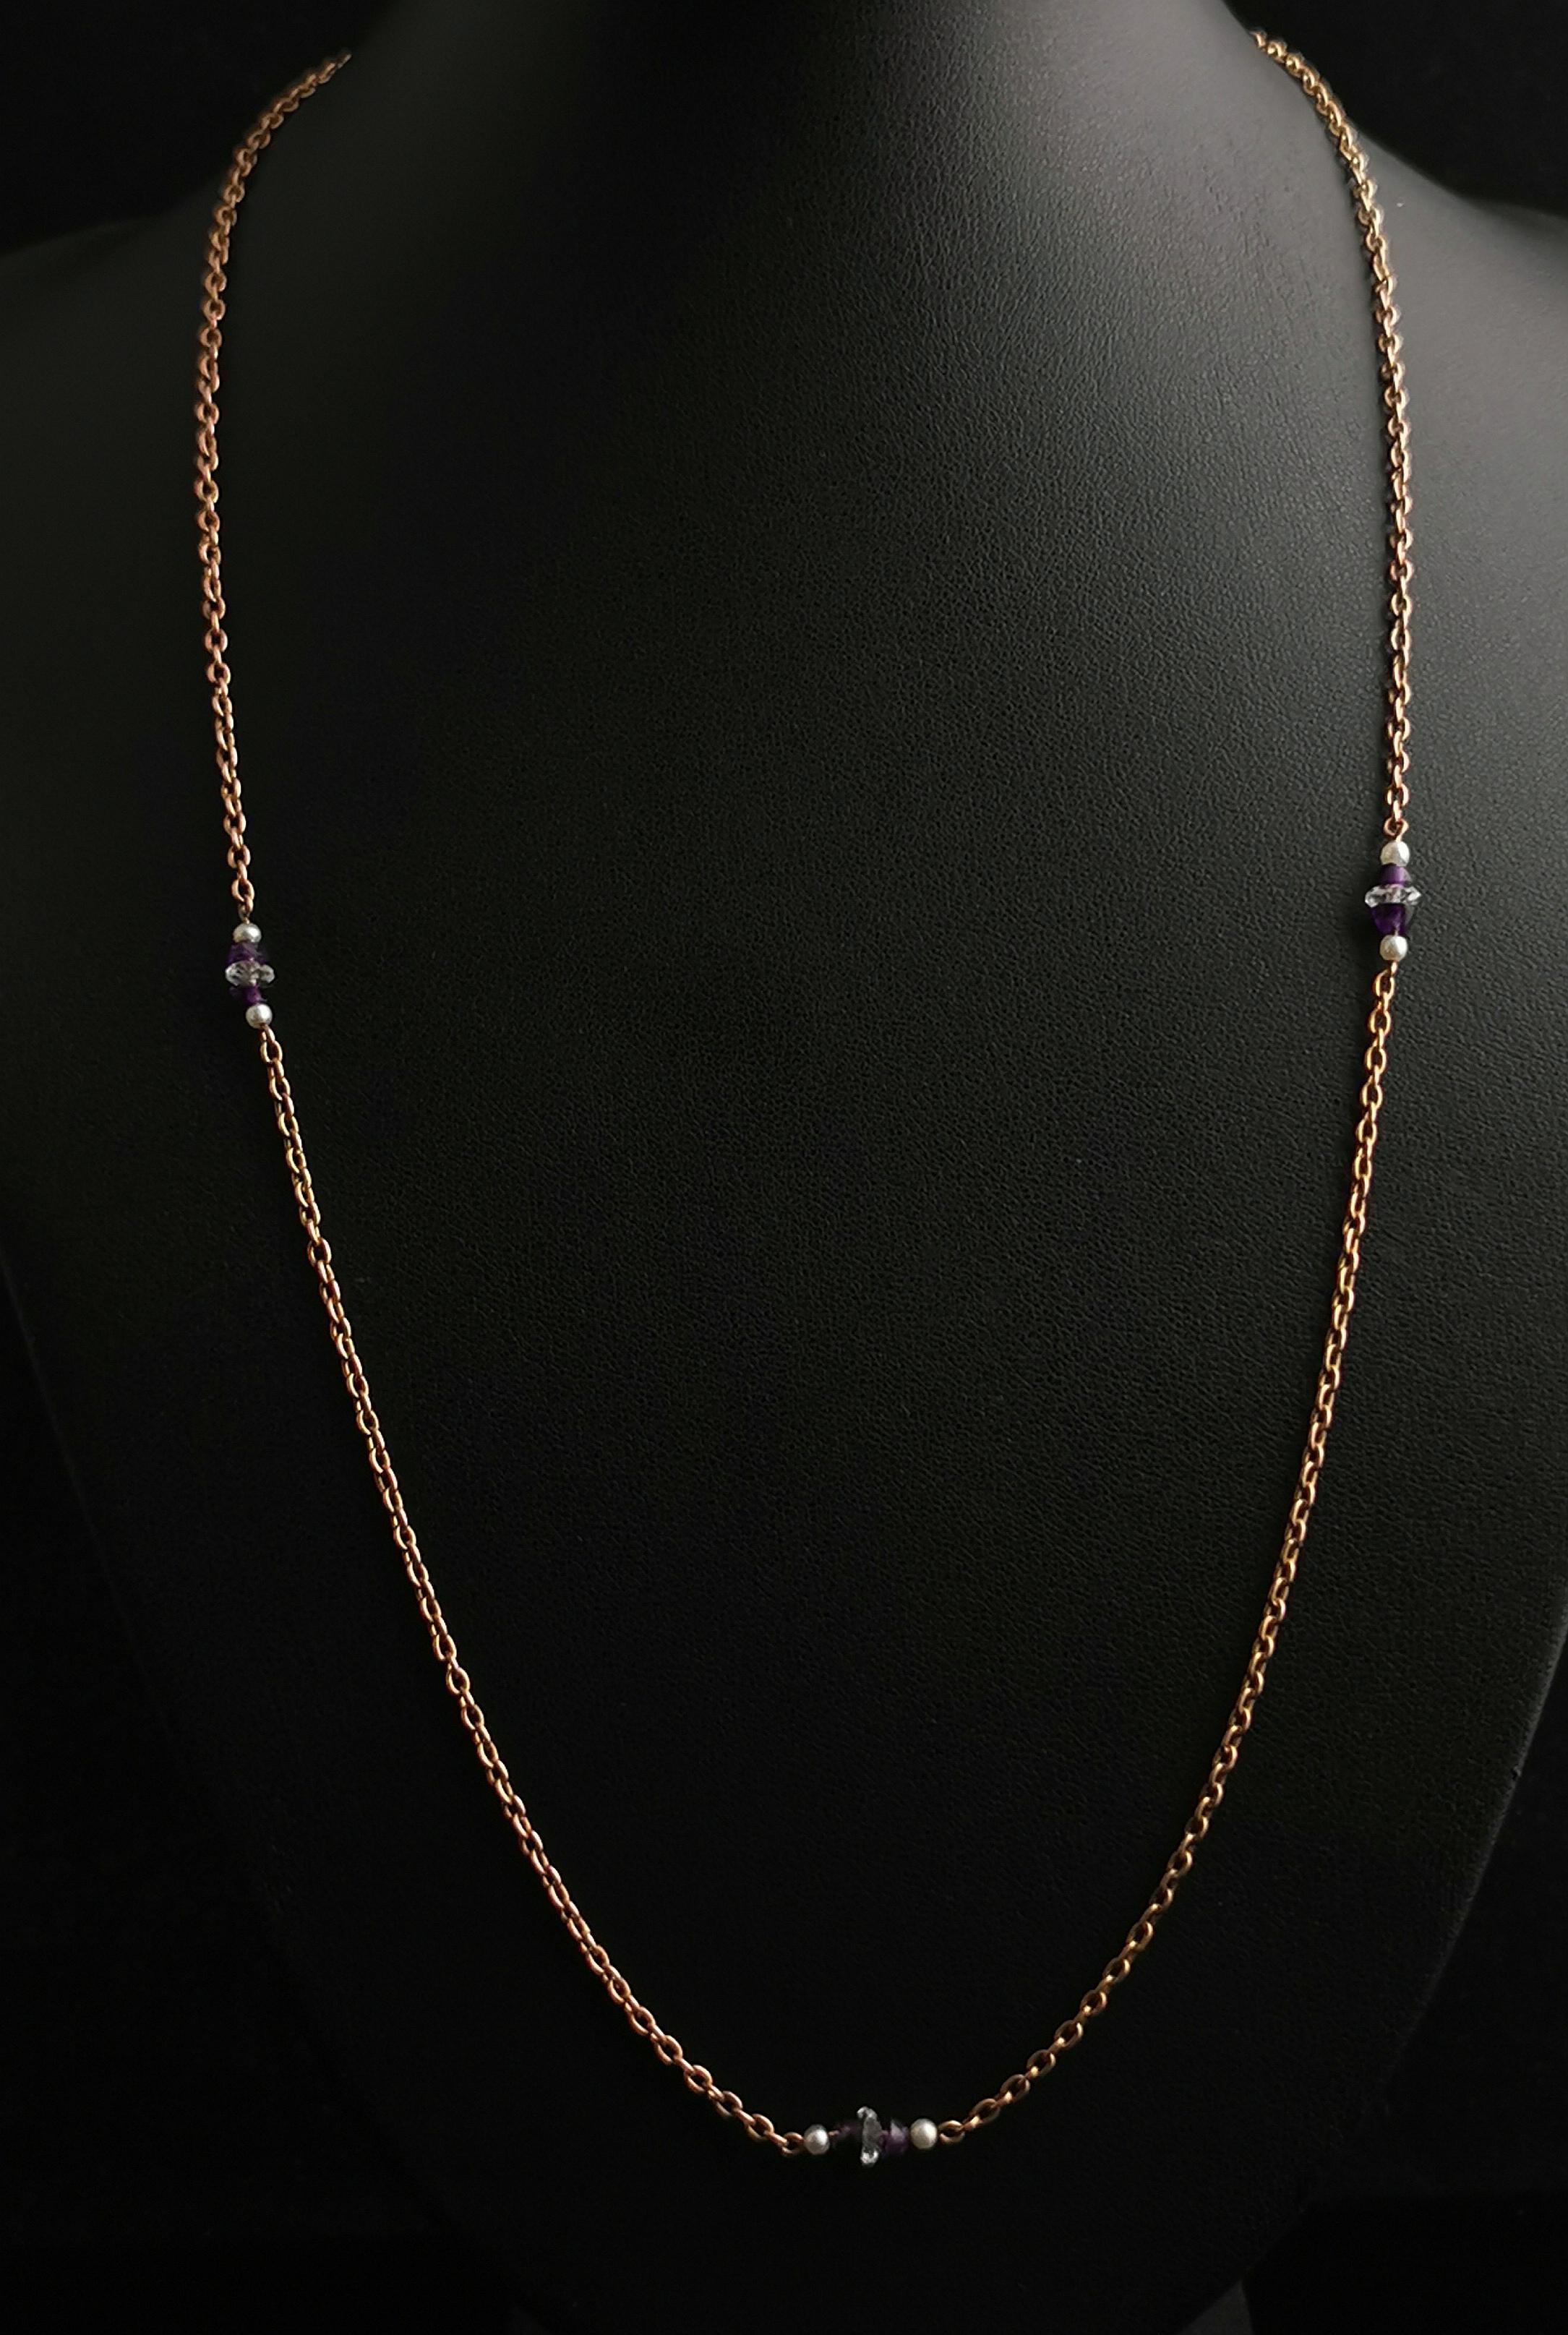 Vintage Art Deco 9k Gold Chain Necklace, Beaded, Rock Crystal, Amethyst, Pearl 3